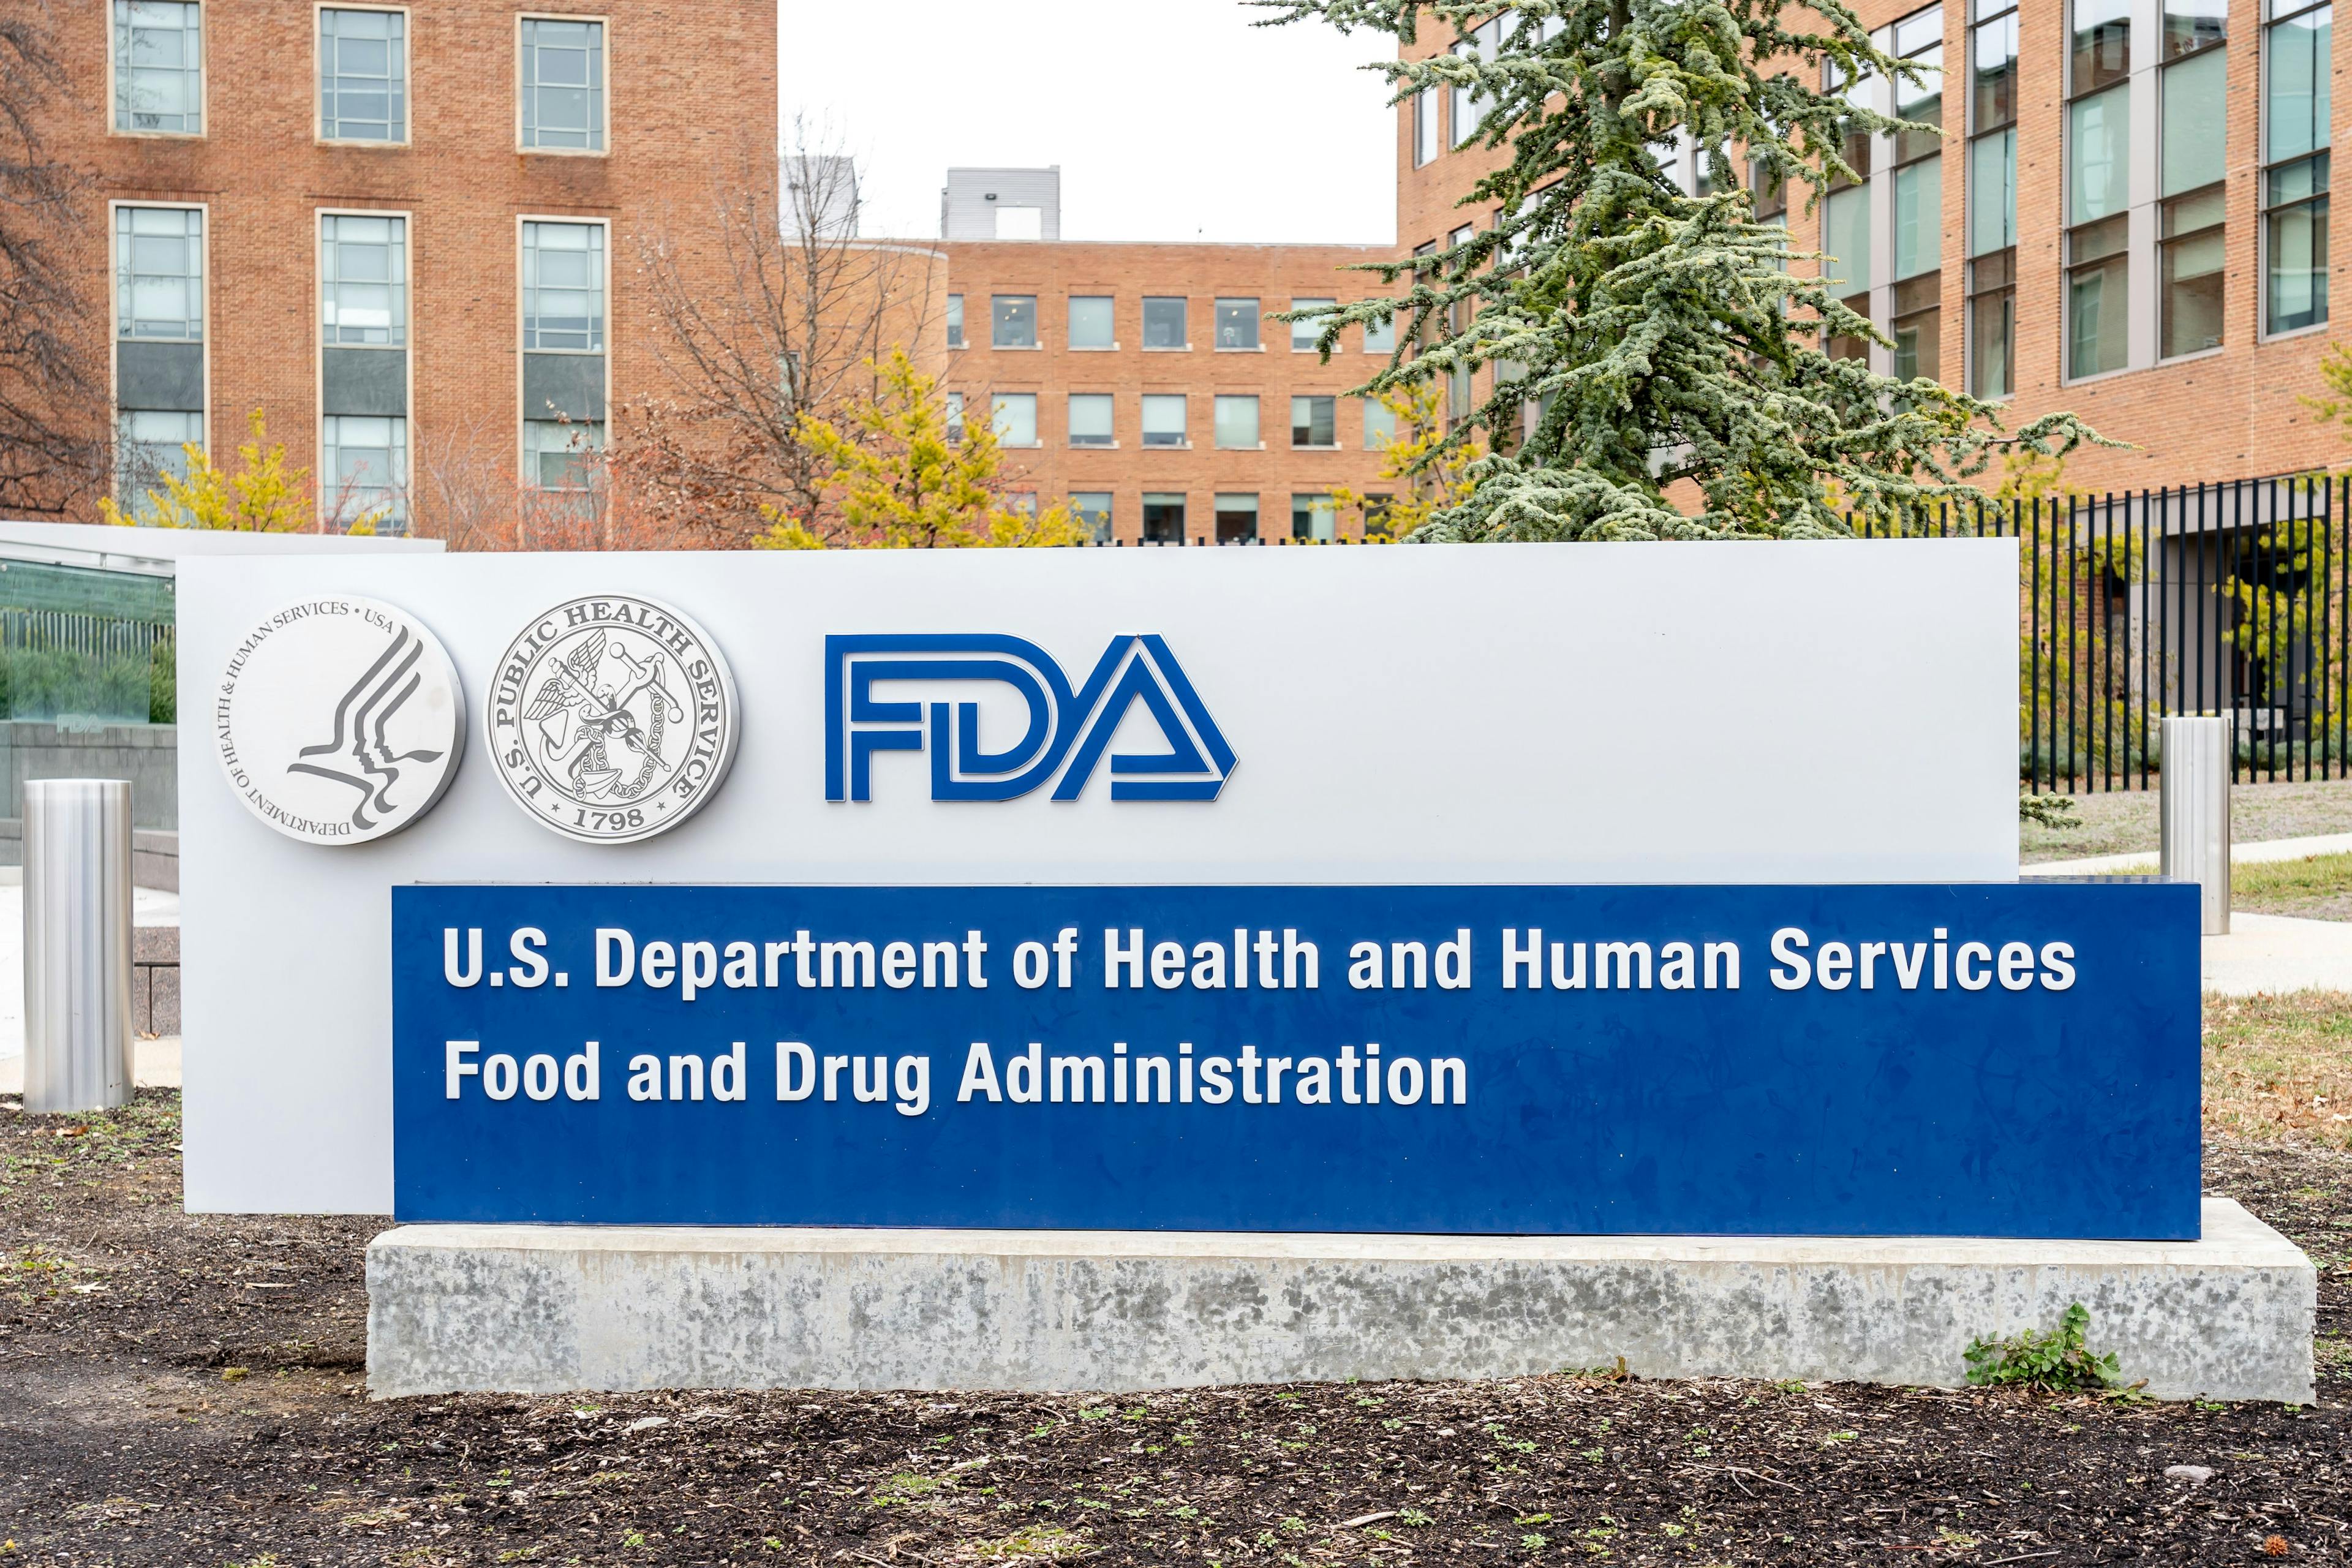 NDA for Givinostat to Treat Duchenne Muscular Dystrophy Accepted by FDA